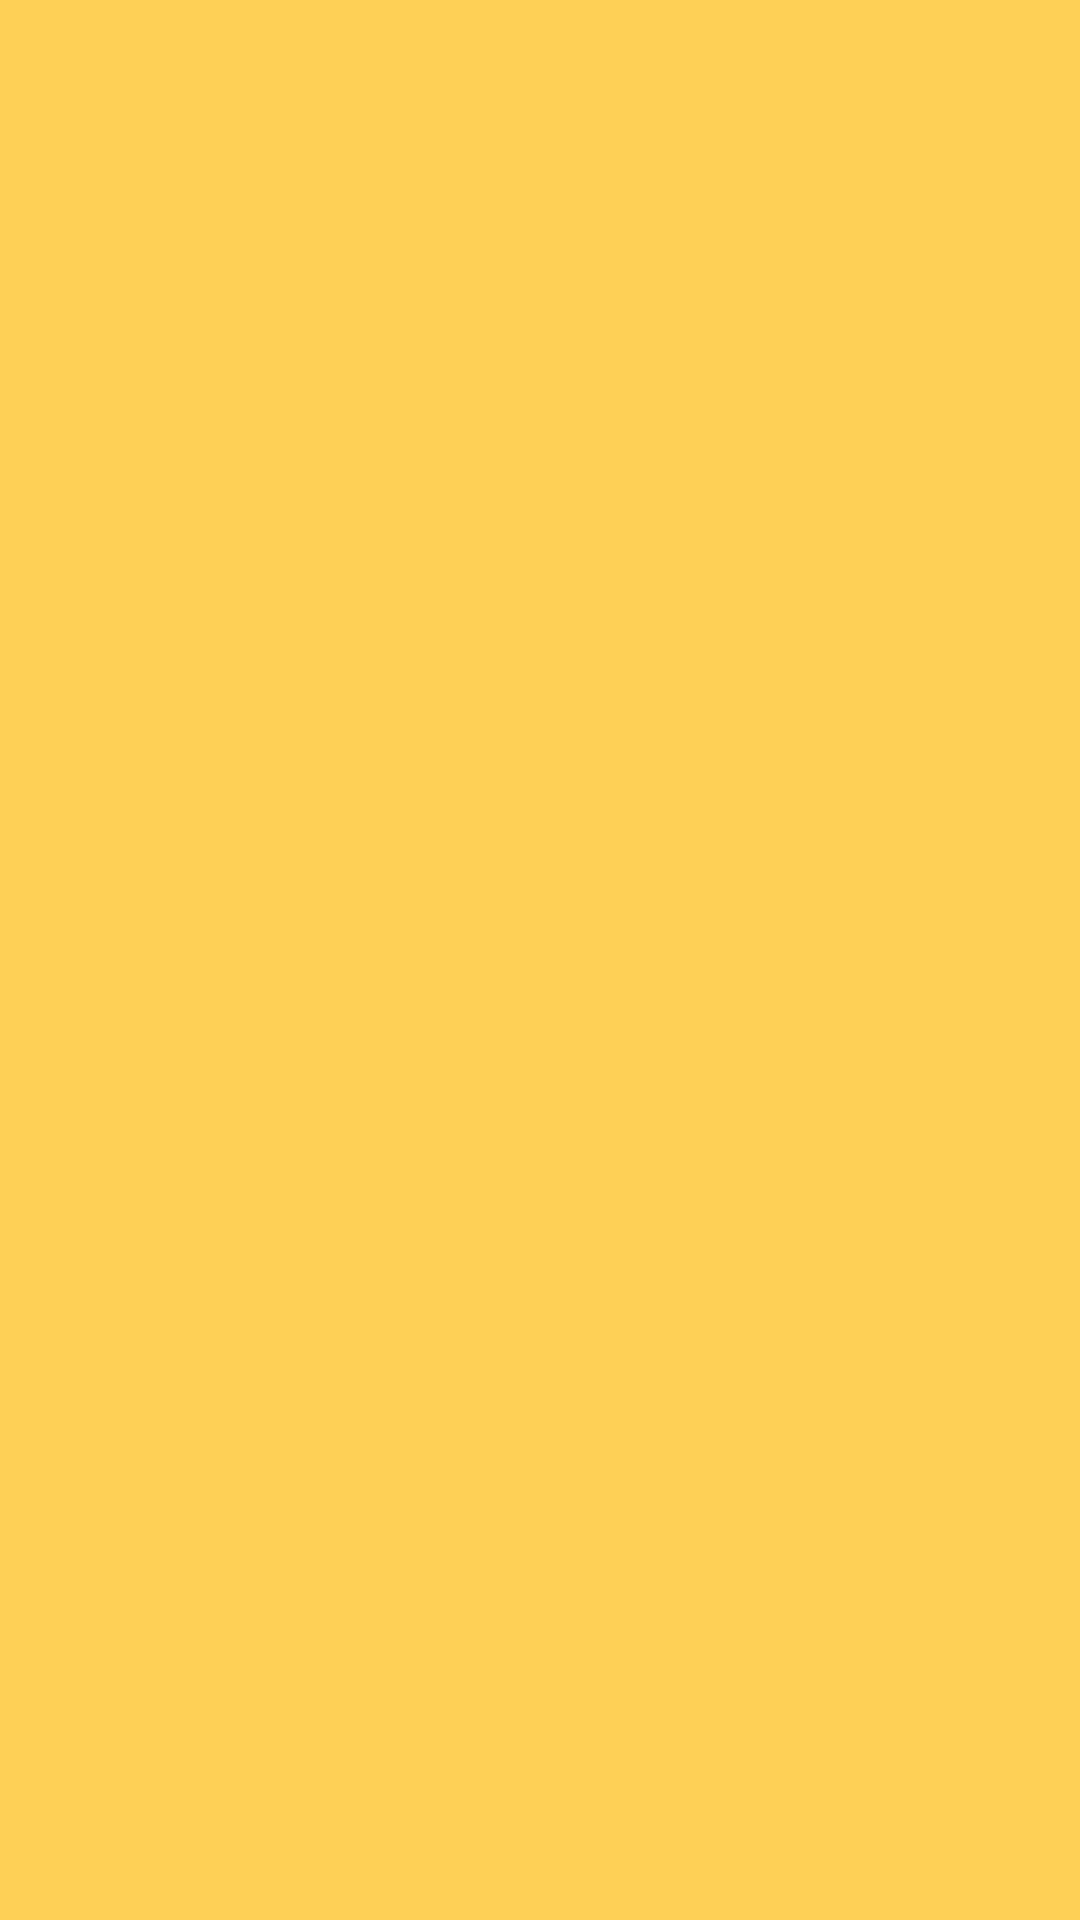 A yellow background with a white border - Light yellow